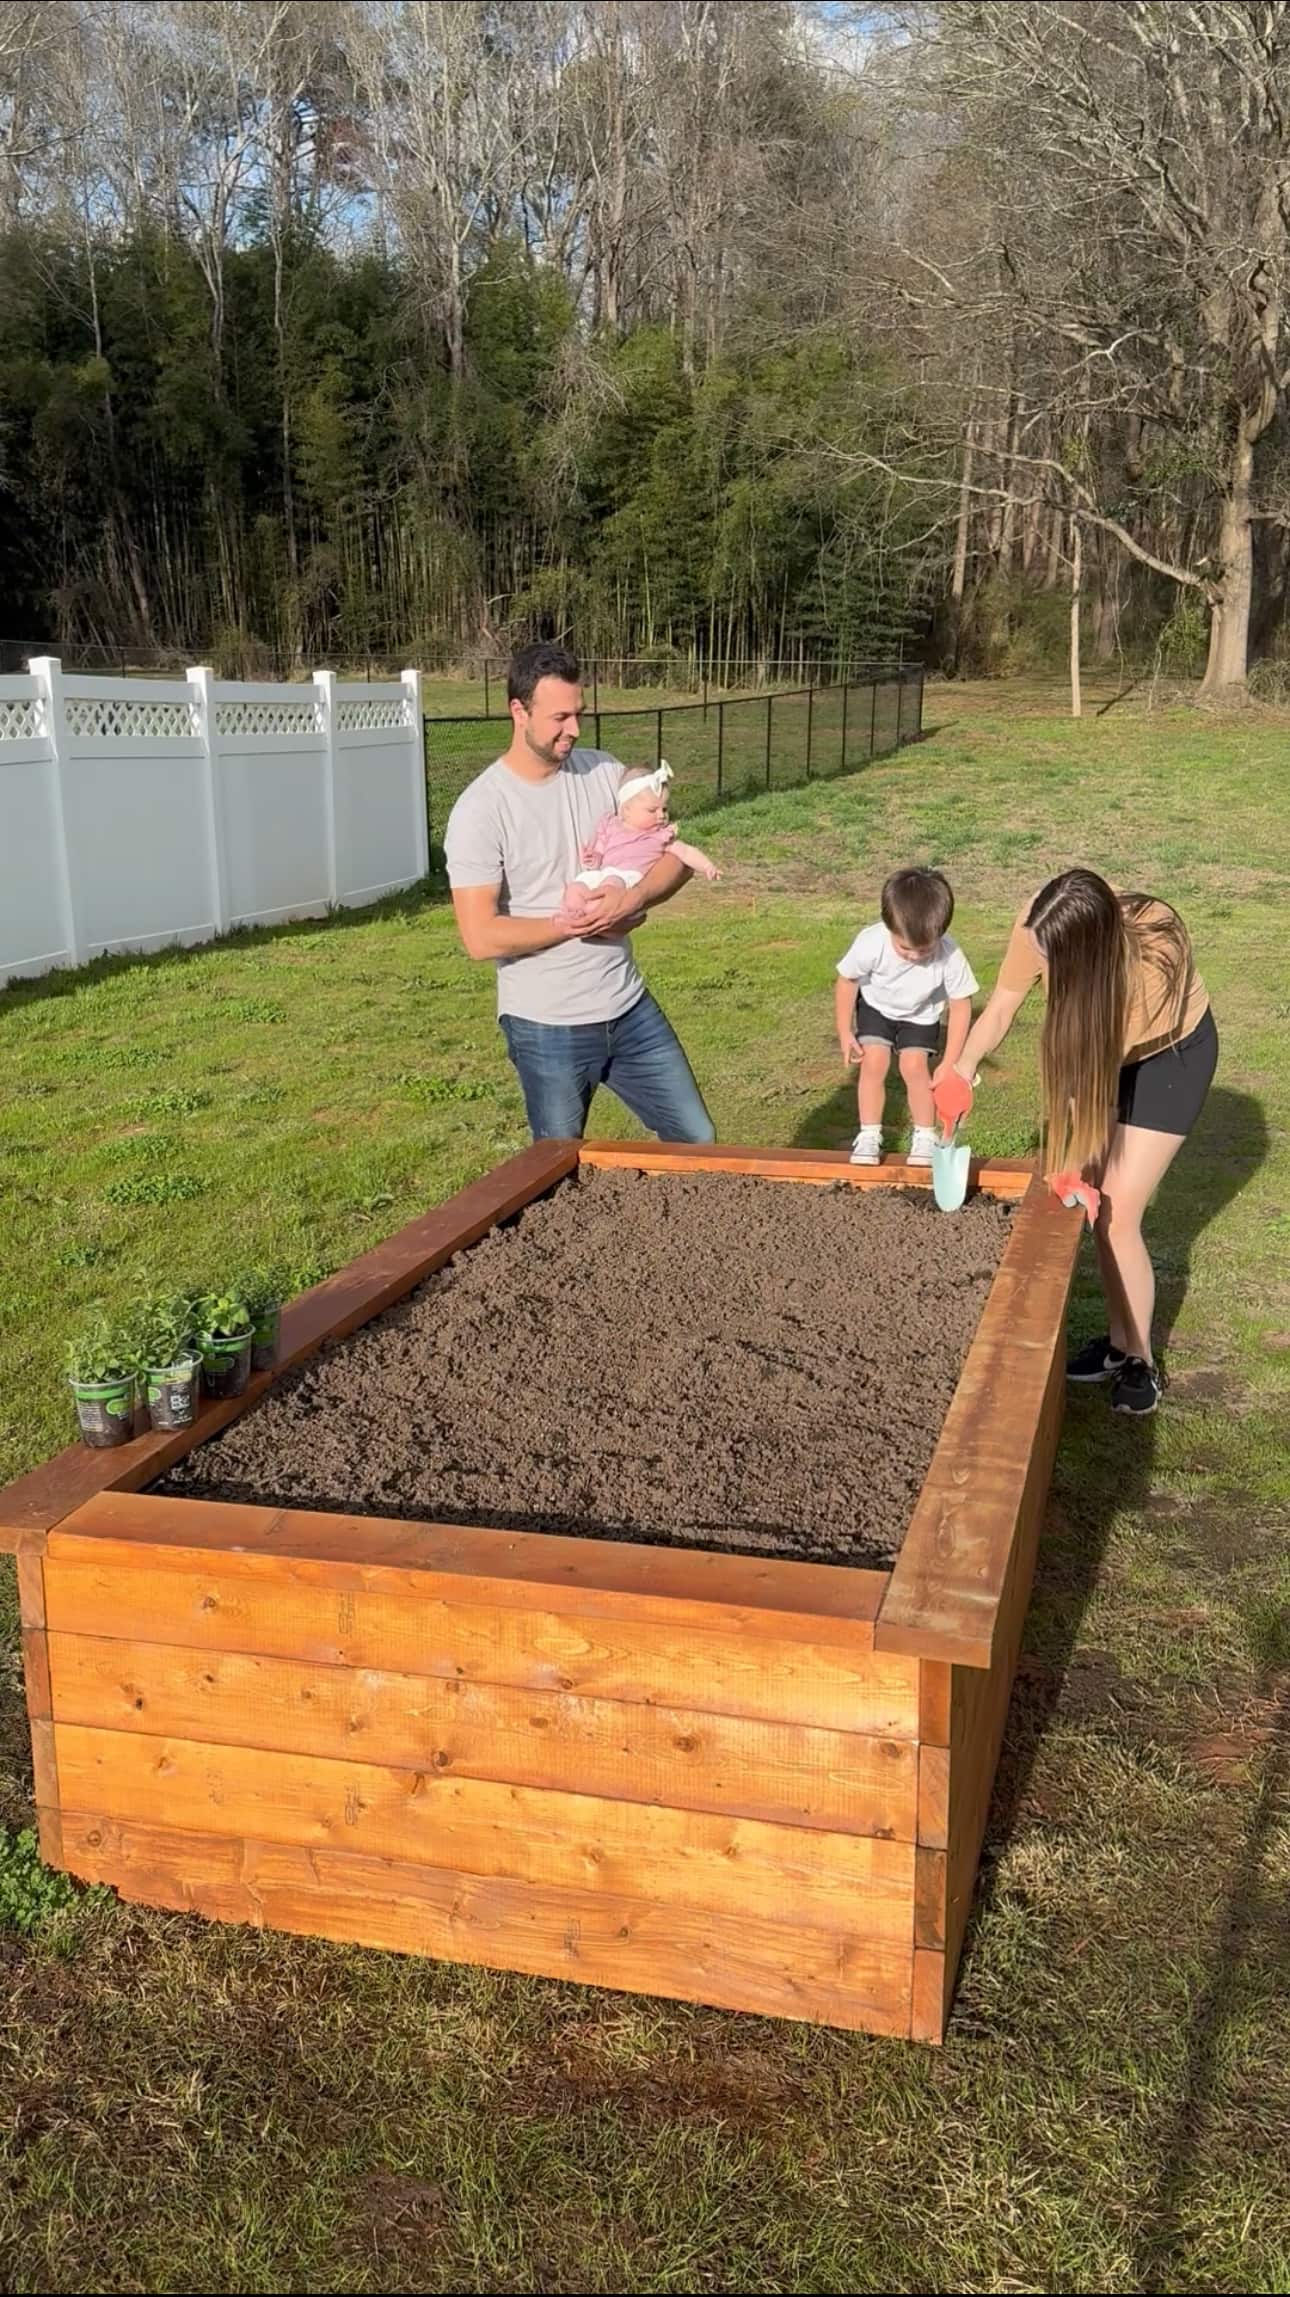 Clayton and his family stand and plant goods in their finished raised garden bed